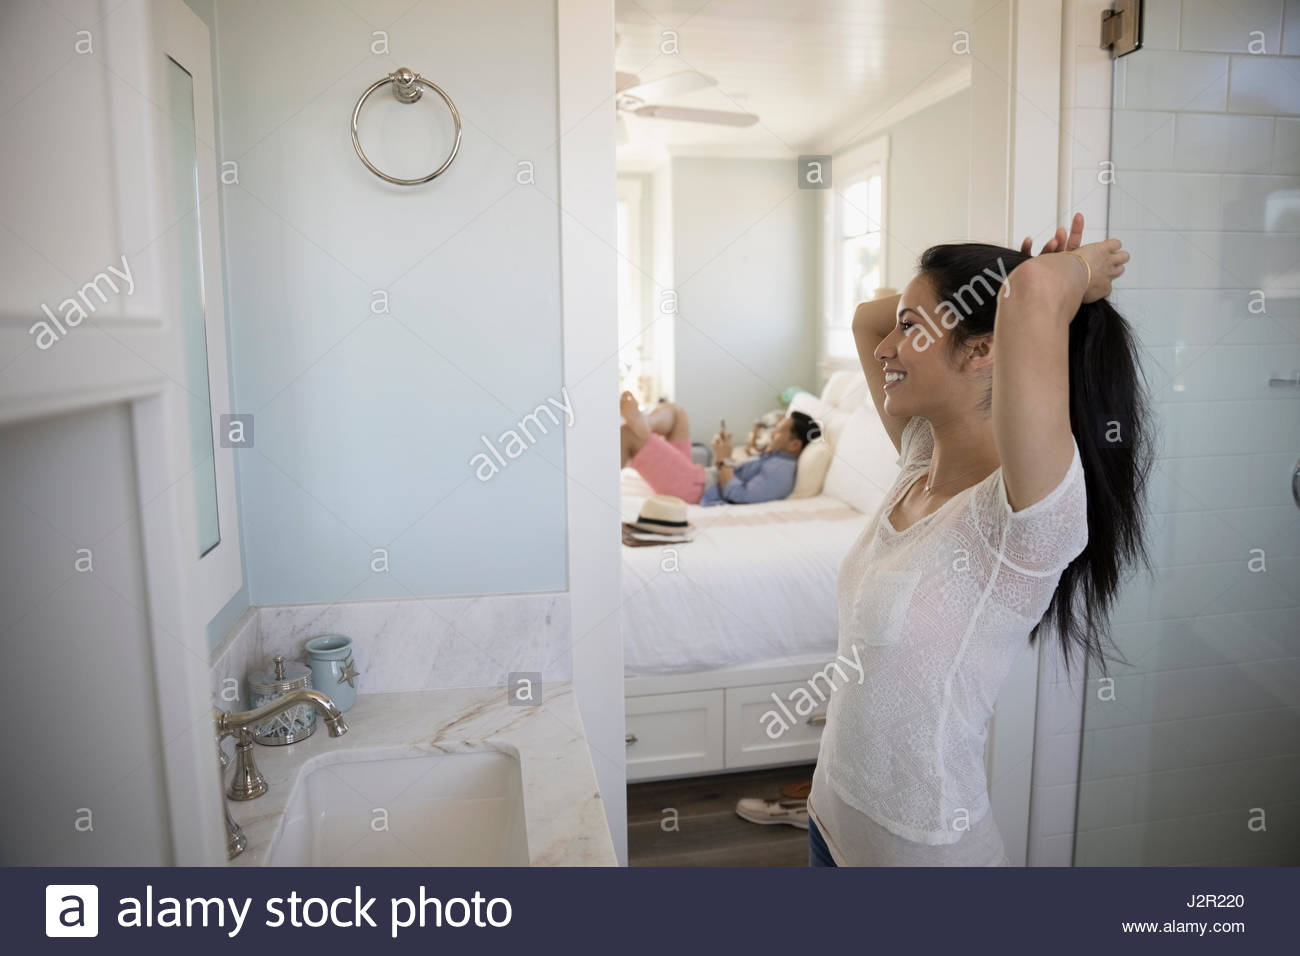 Woman fixing hair into ponytail in bathroom Stock Photo